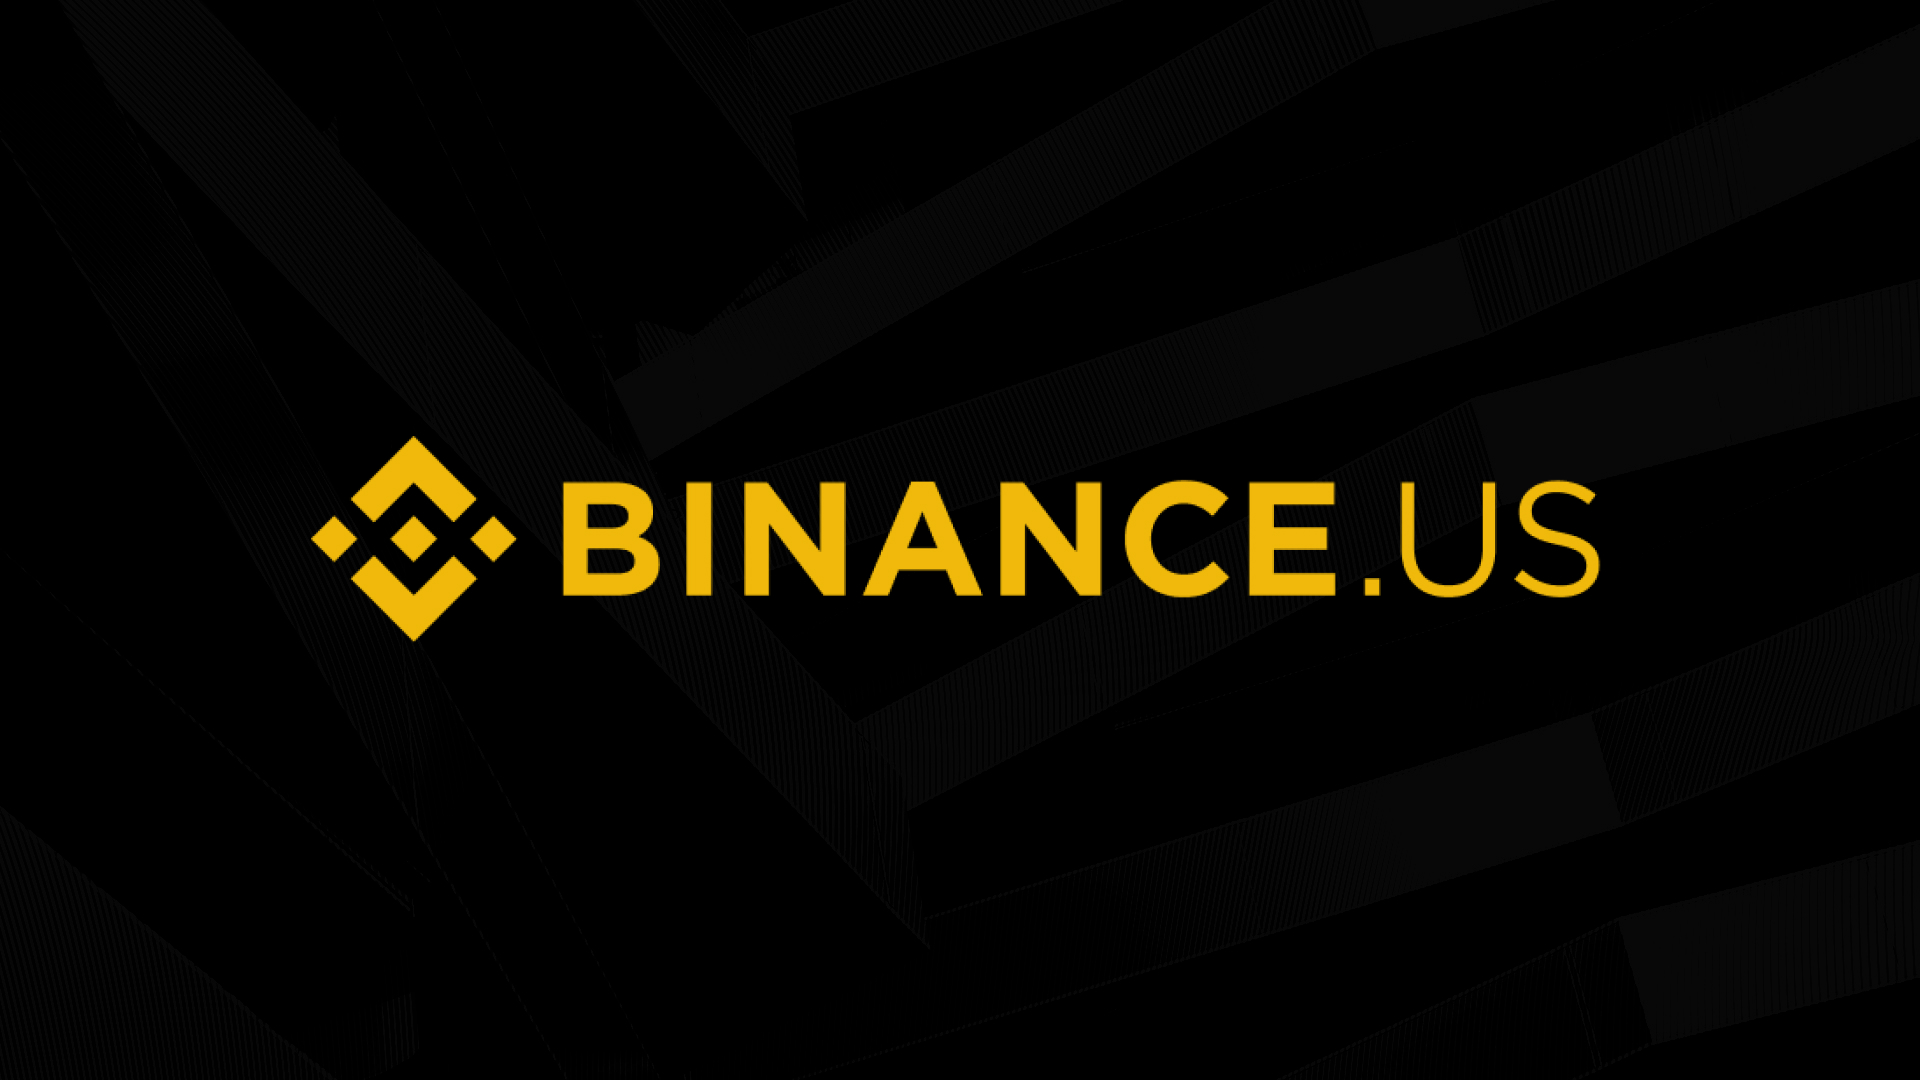 SEC Accuses Binance.US of Inflating Trading Volumes